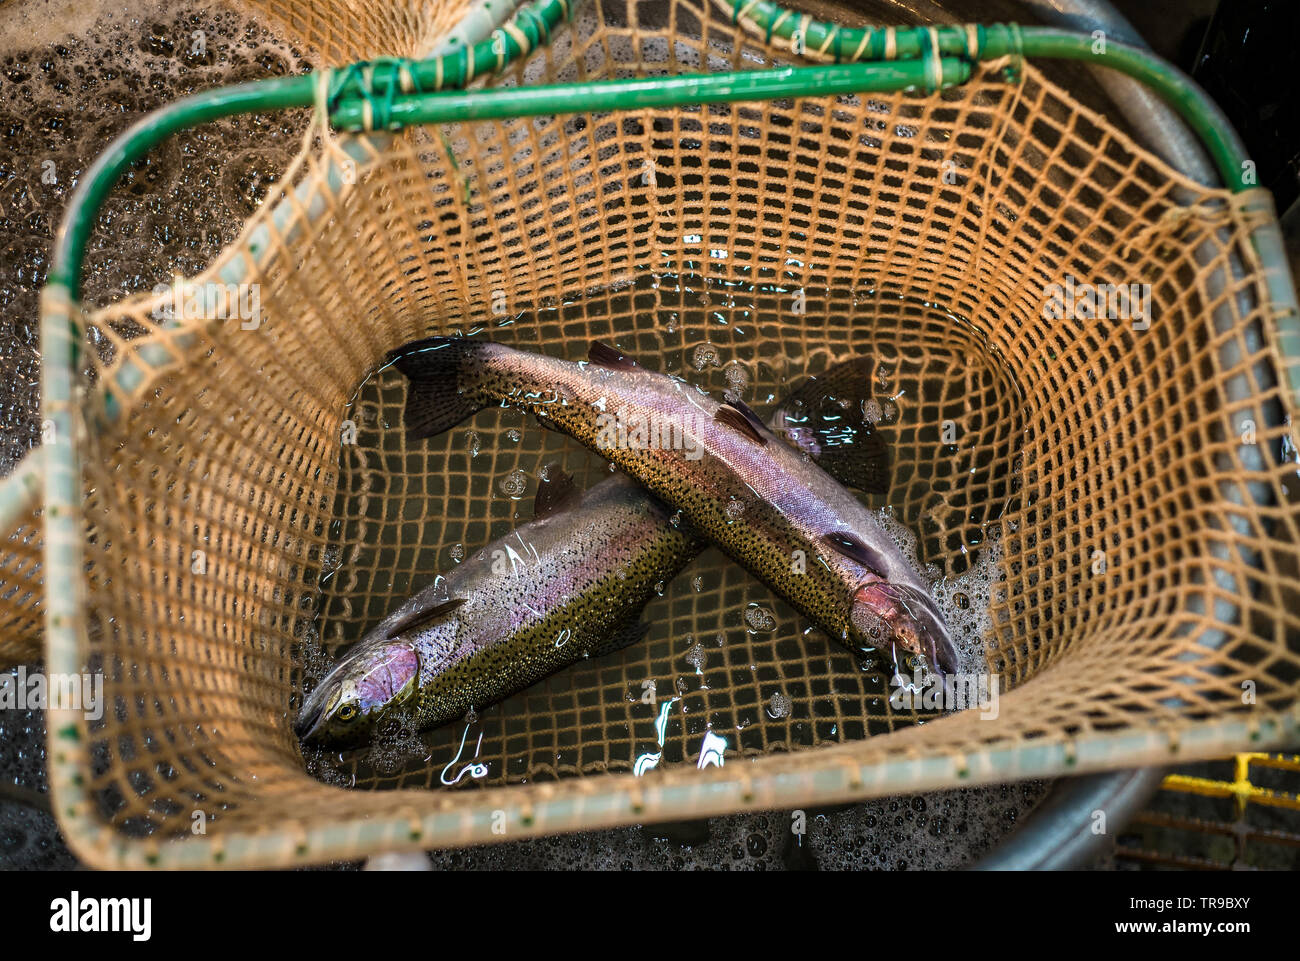 Two young rainbow or steelhead trout in a net at a fish hatchery, being transferred to a holding or growout tank. Stock Photo